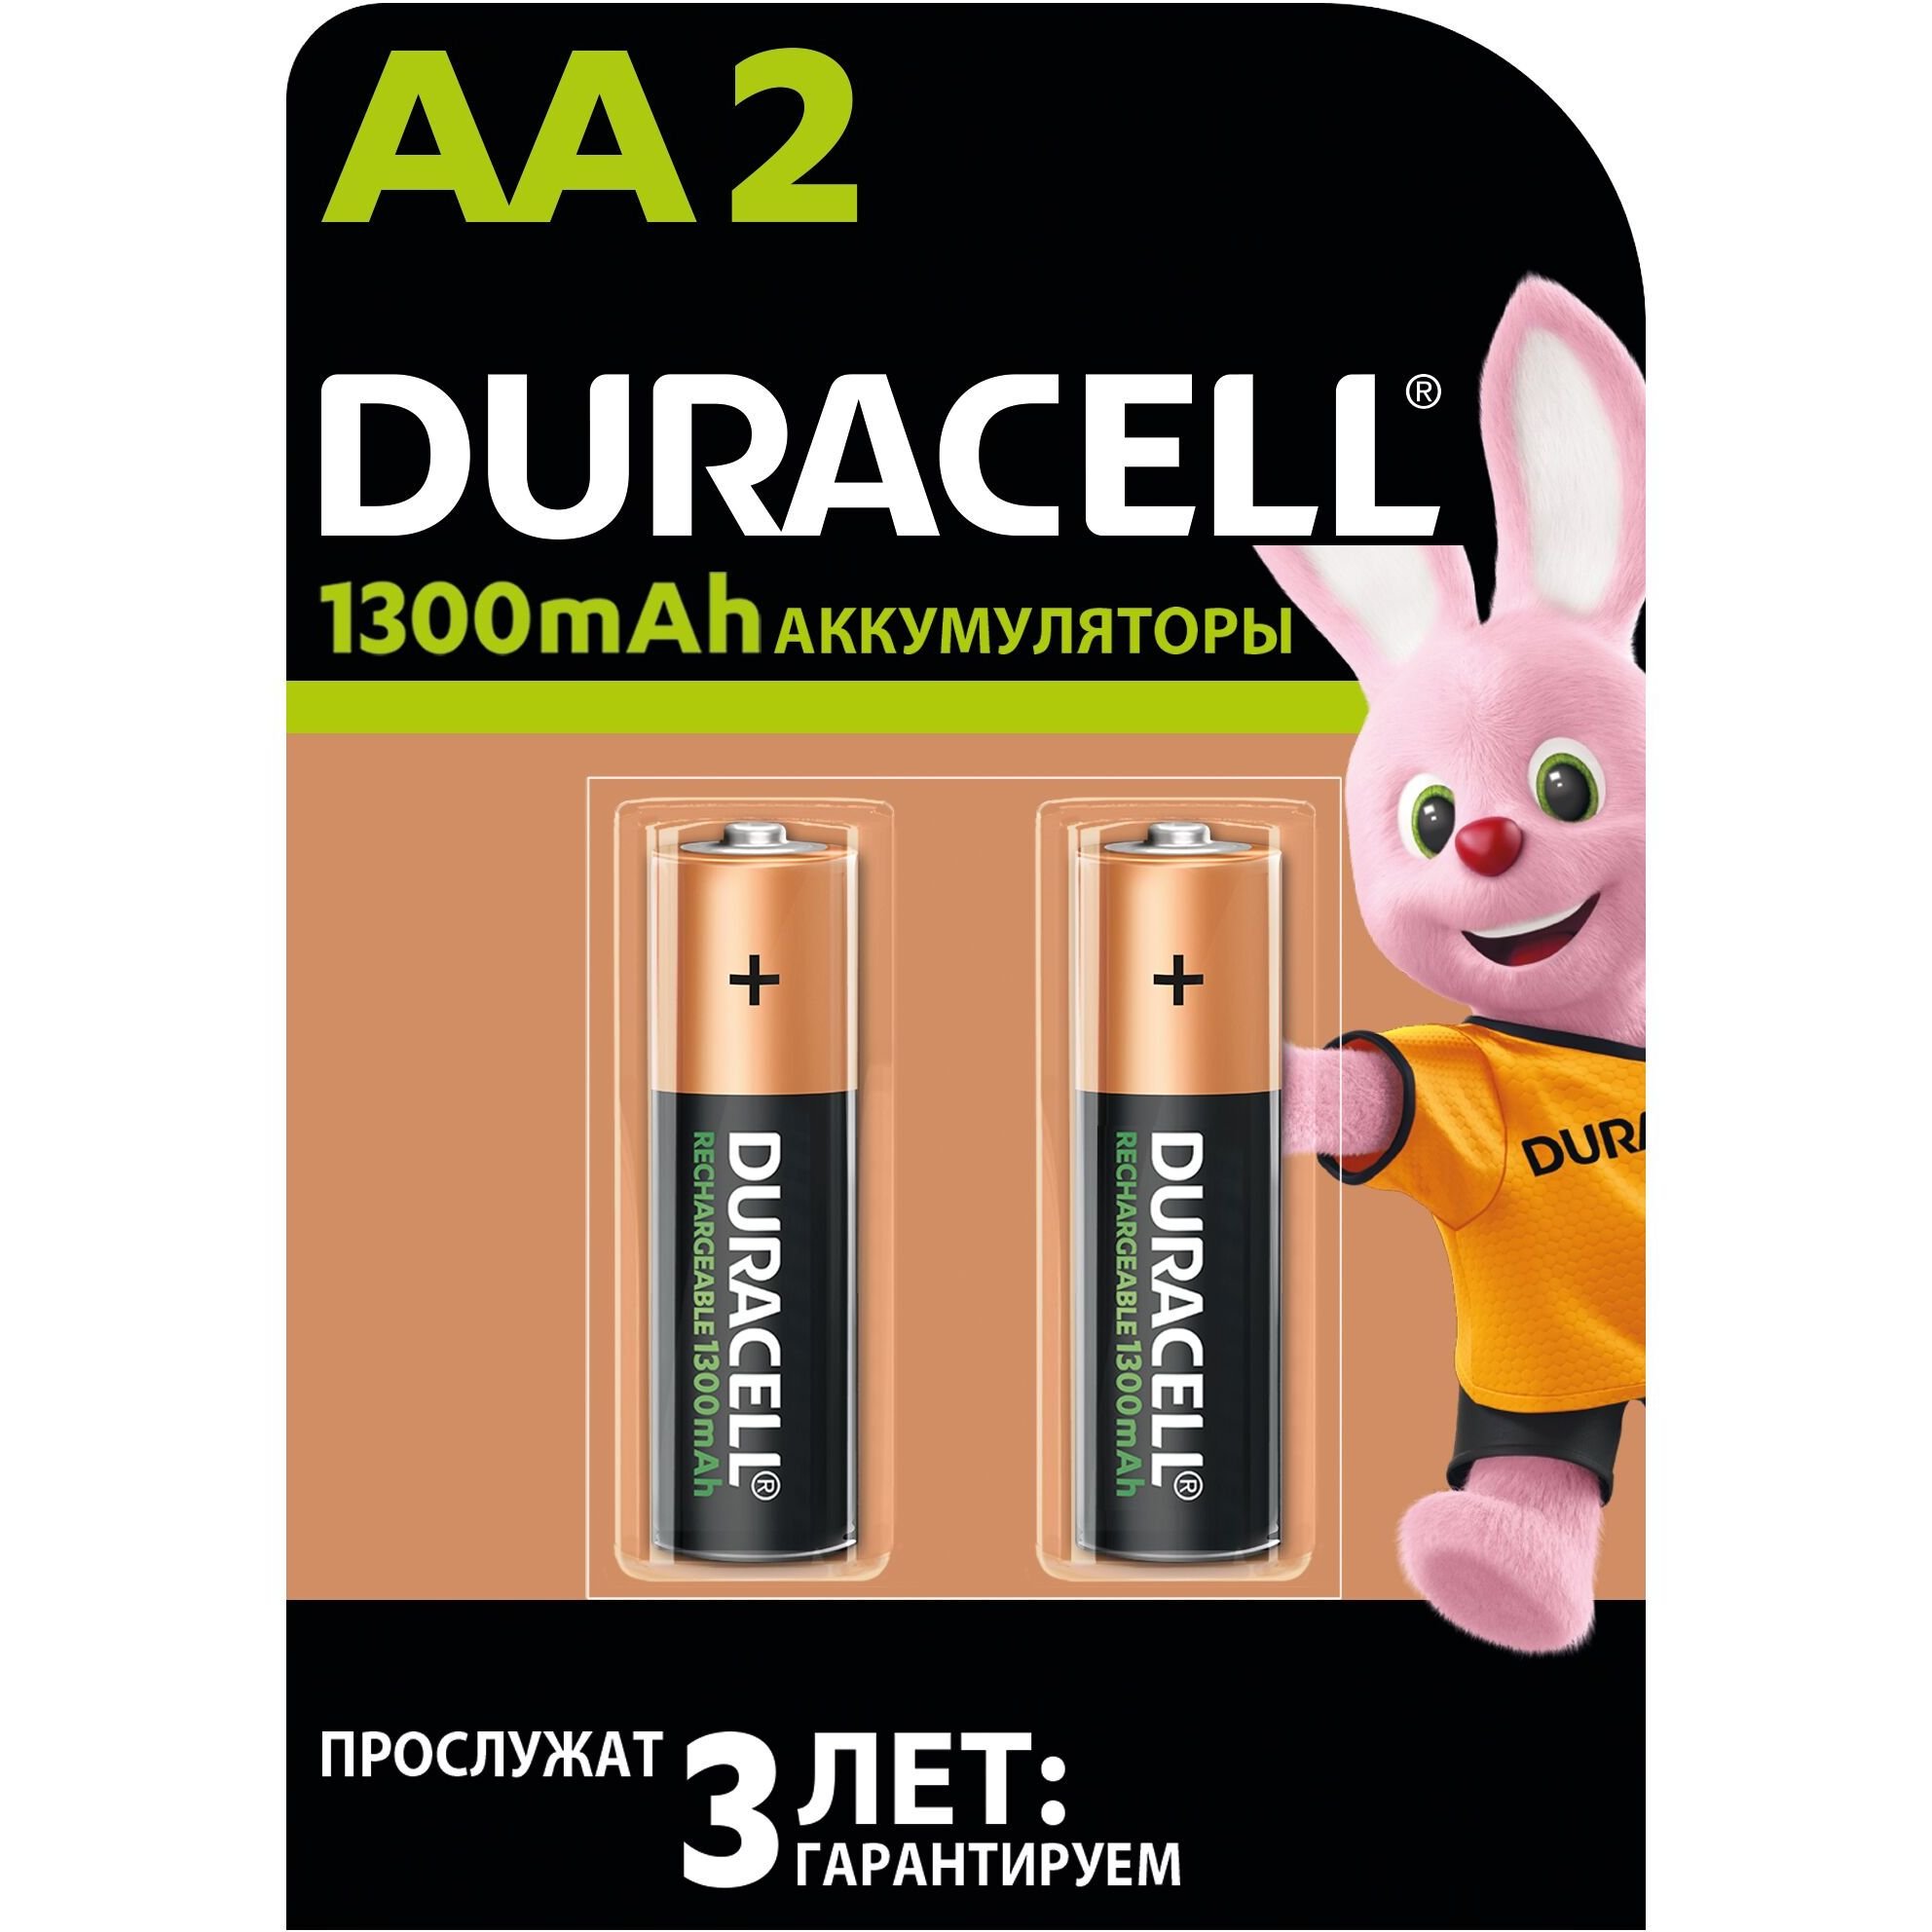 Photos - Battery Duracell Акумулятори  Rechargeable AA 1300 mAh HR6/DC1500, 2 шт.  (736720)